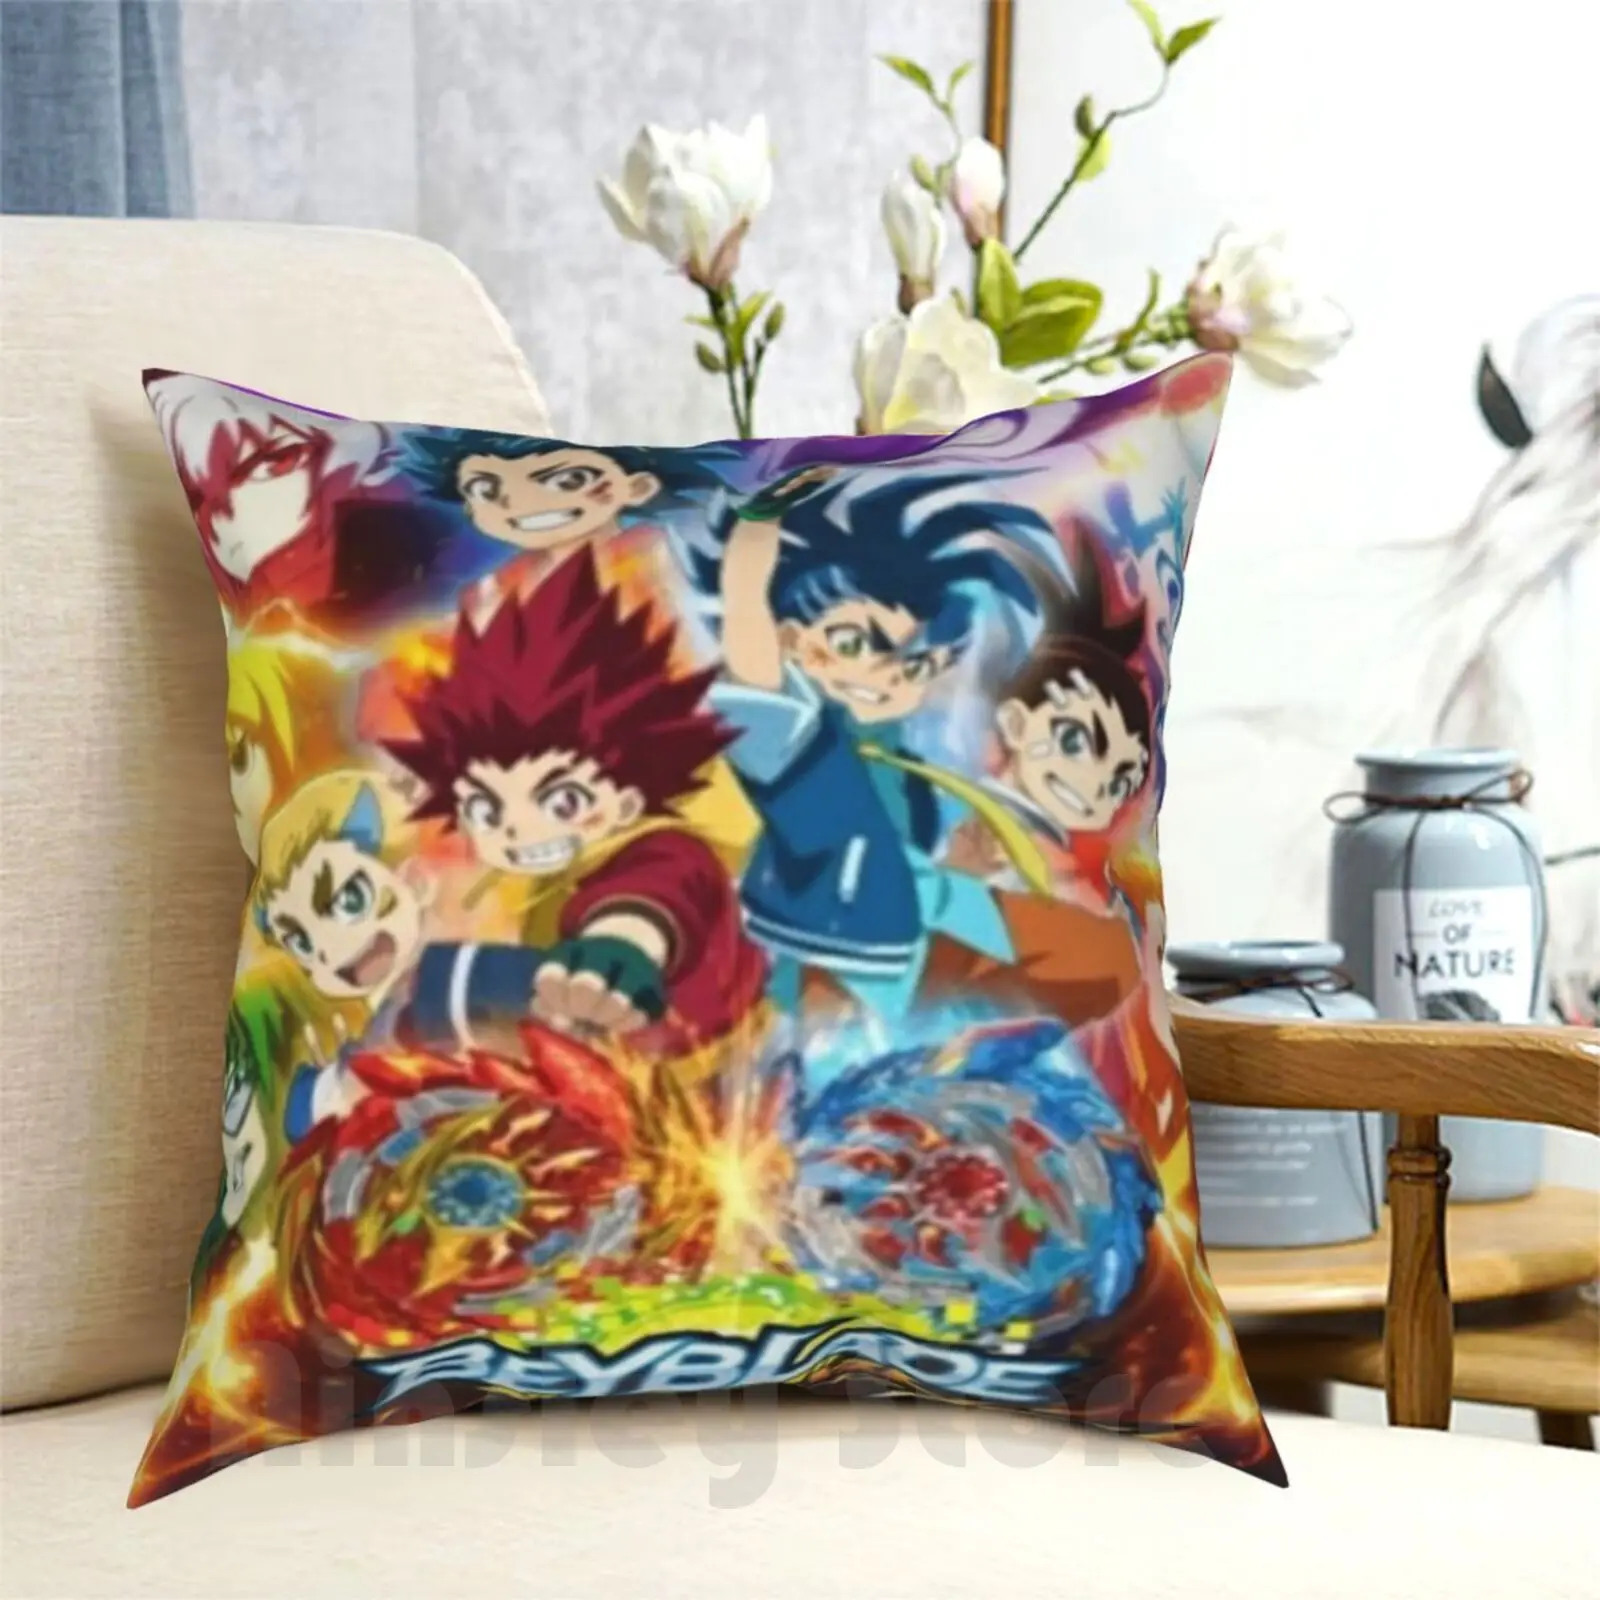 Details about   Beyblade Burst Cushion Cover Square Throw Pillow Case Waist Couch Cool DIY Gifts 